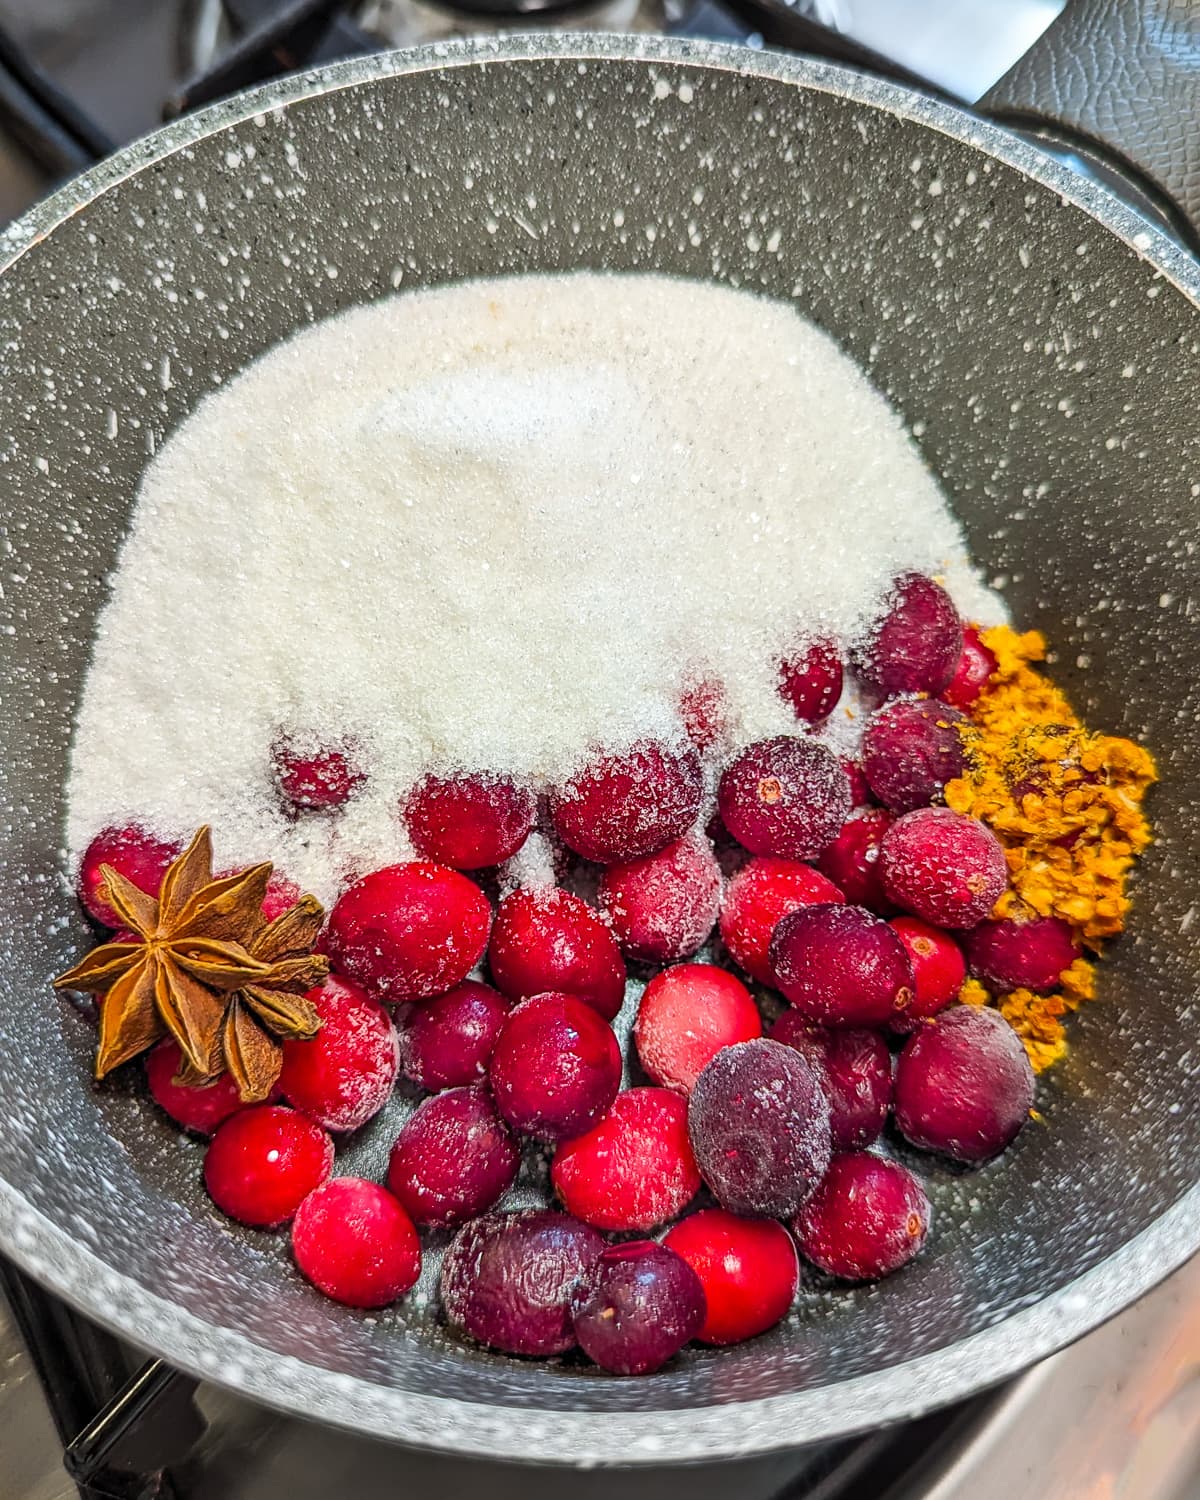 Frozen cranberries, star anice, dried orange peel and sugar in a pan on the stove.